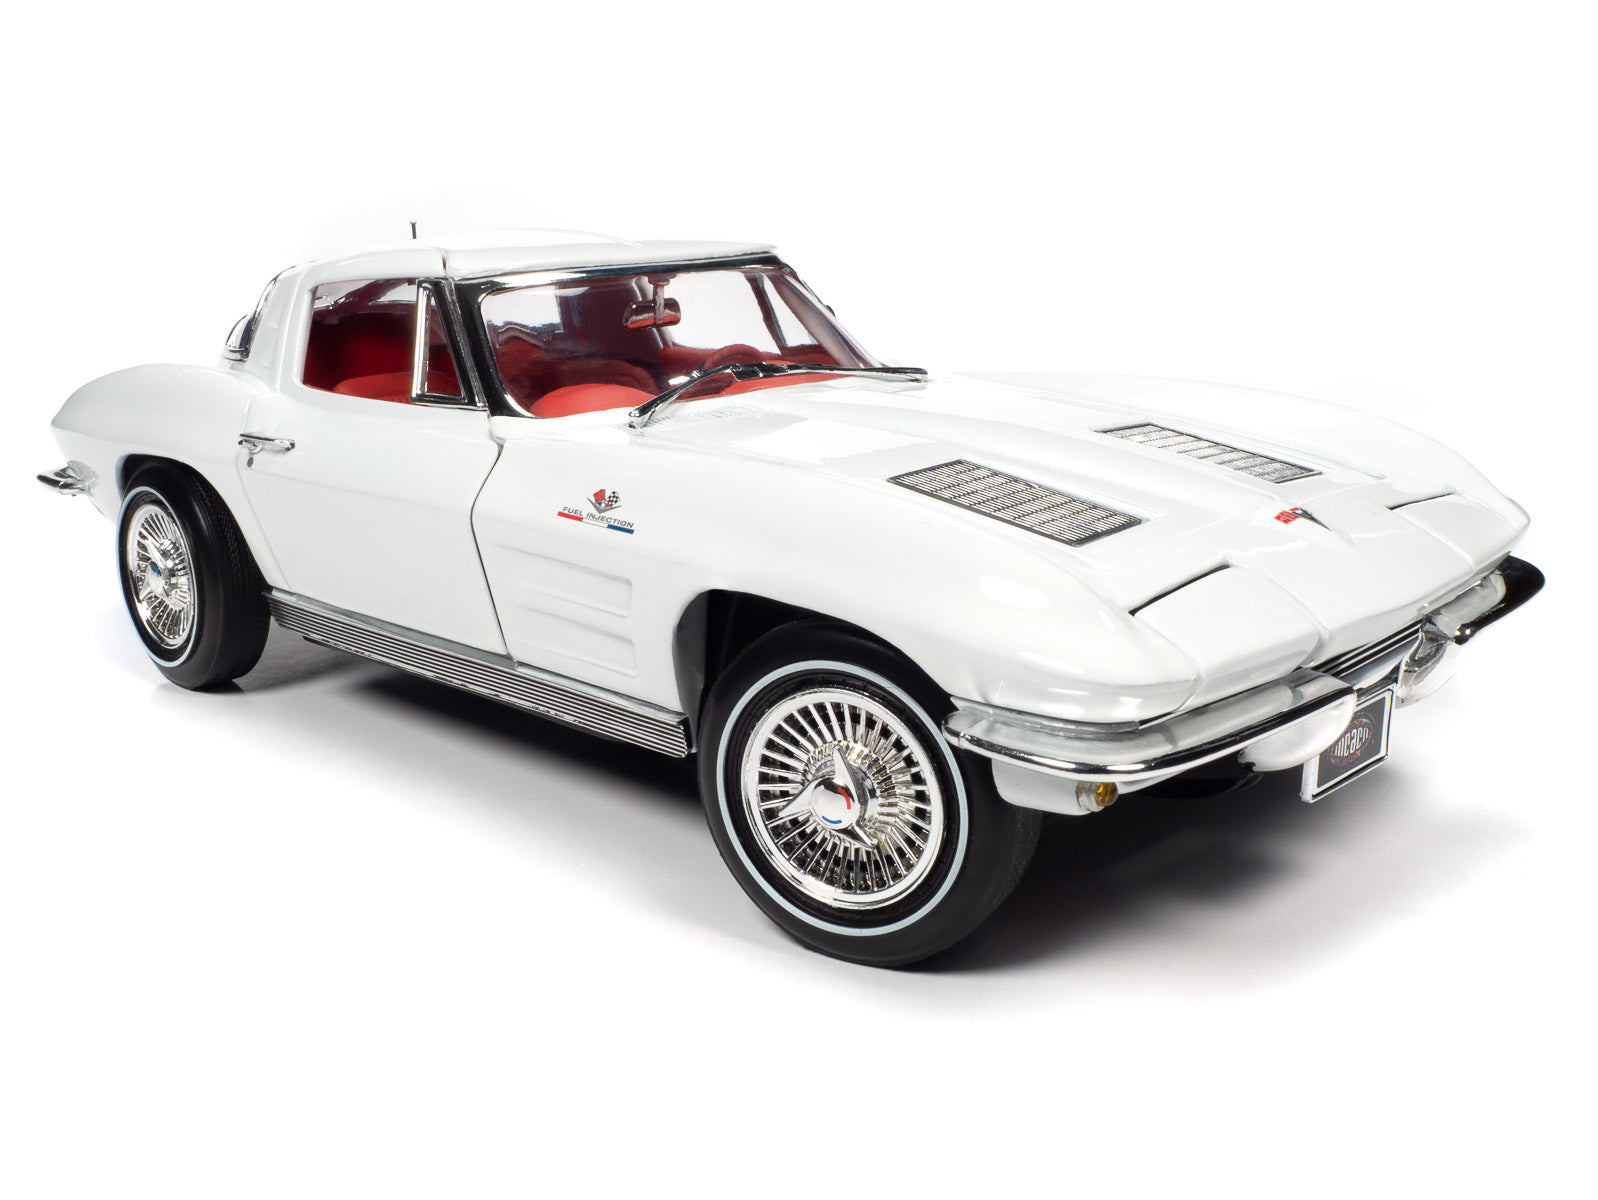 American Muscle 1963 Chevrolet Corvette Coupe (MCACN) 1:18 Scale